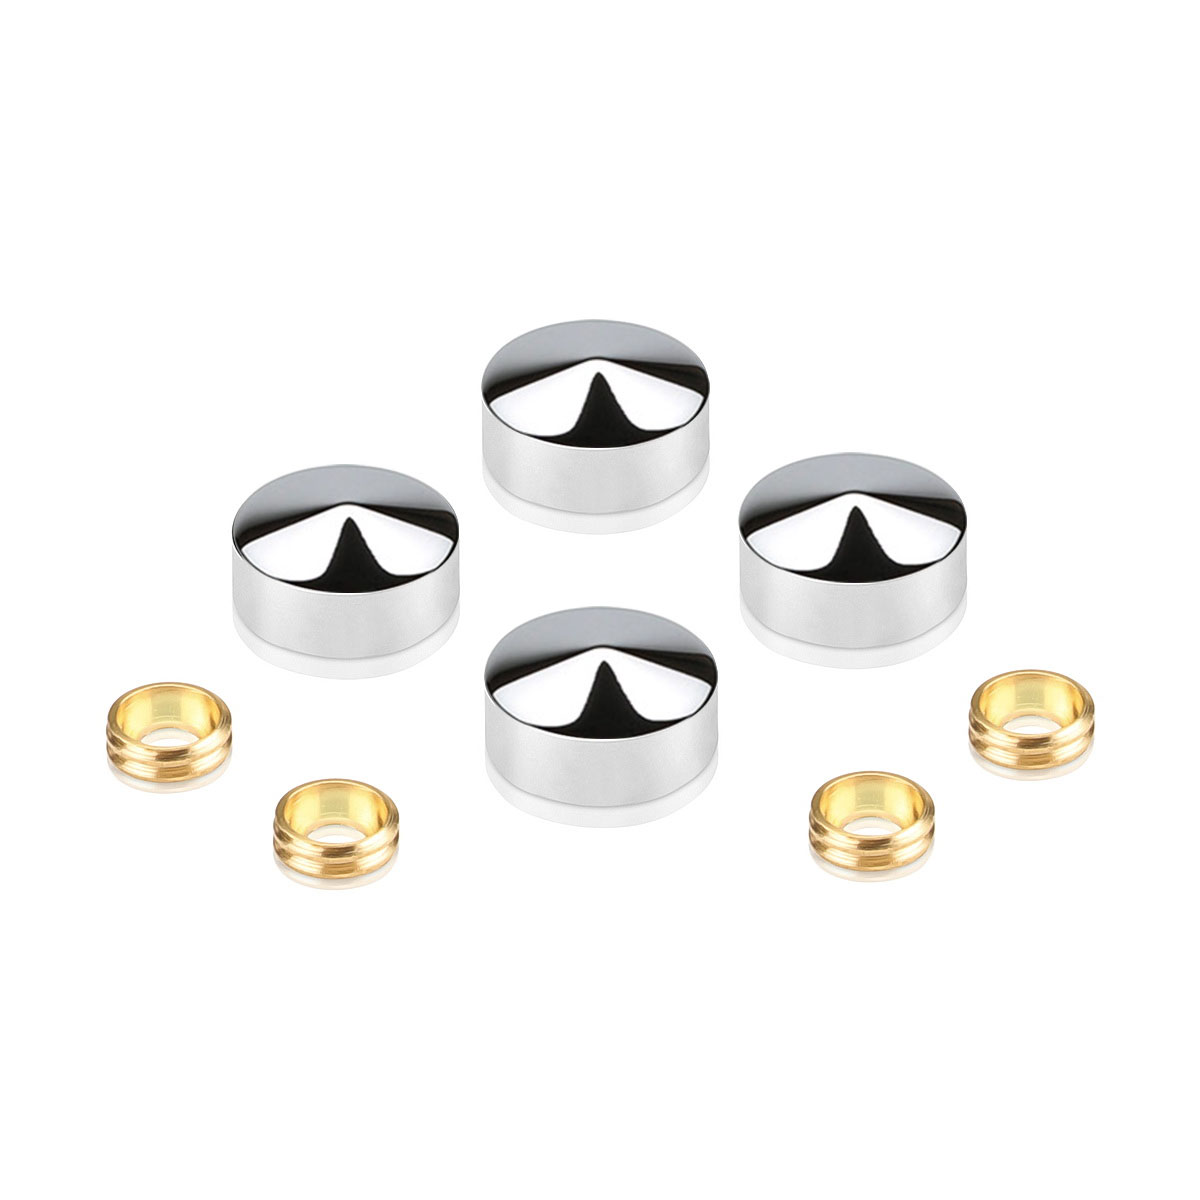 Set of Conical Screw Cover Diameter 11/16'', Polished Stainless Steel Finish (Indoor or Outdoor)